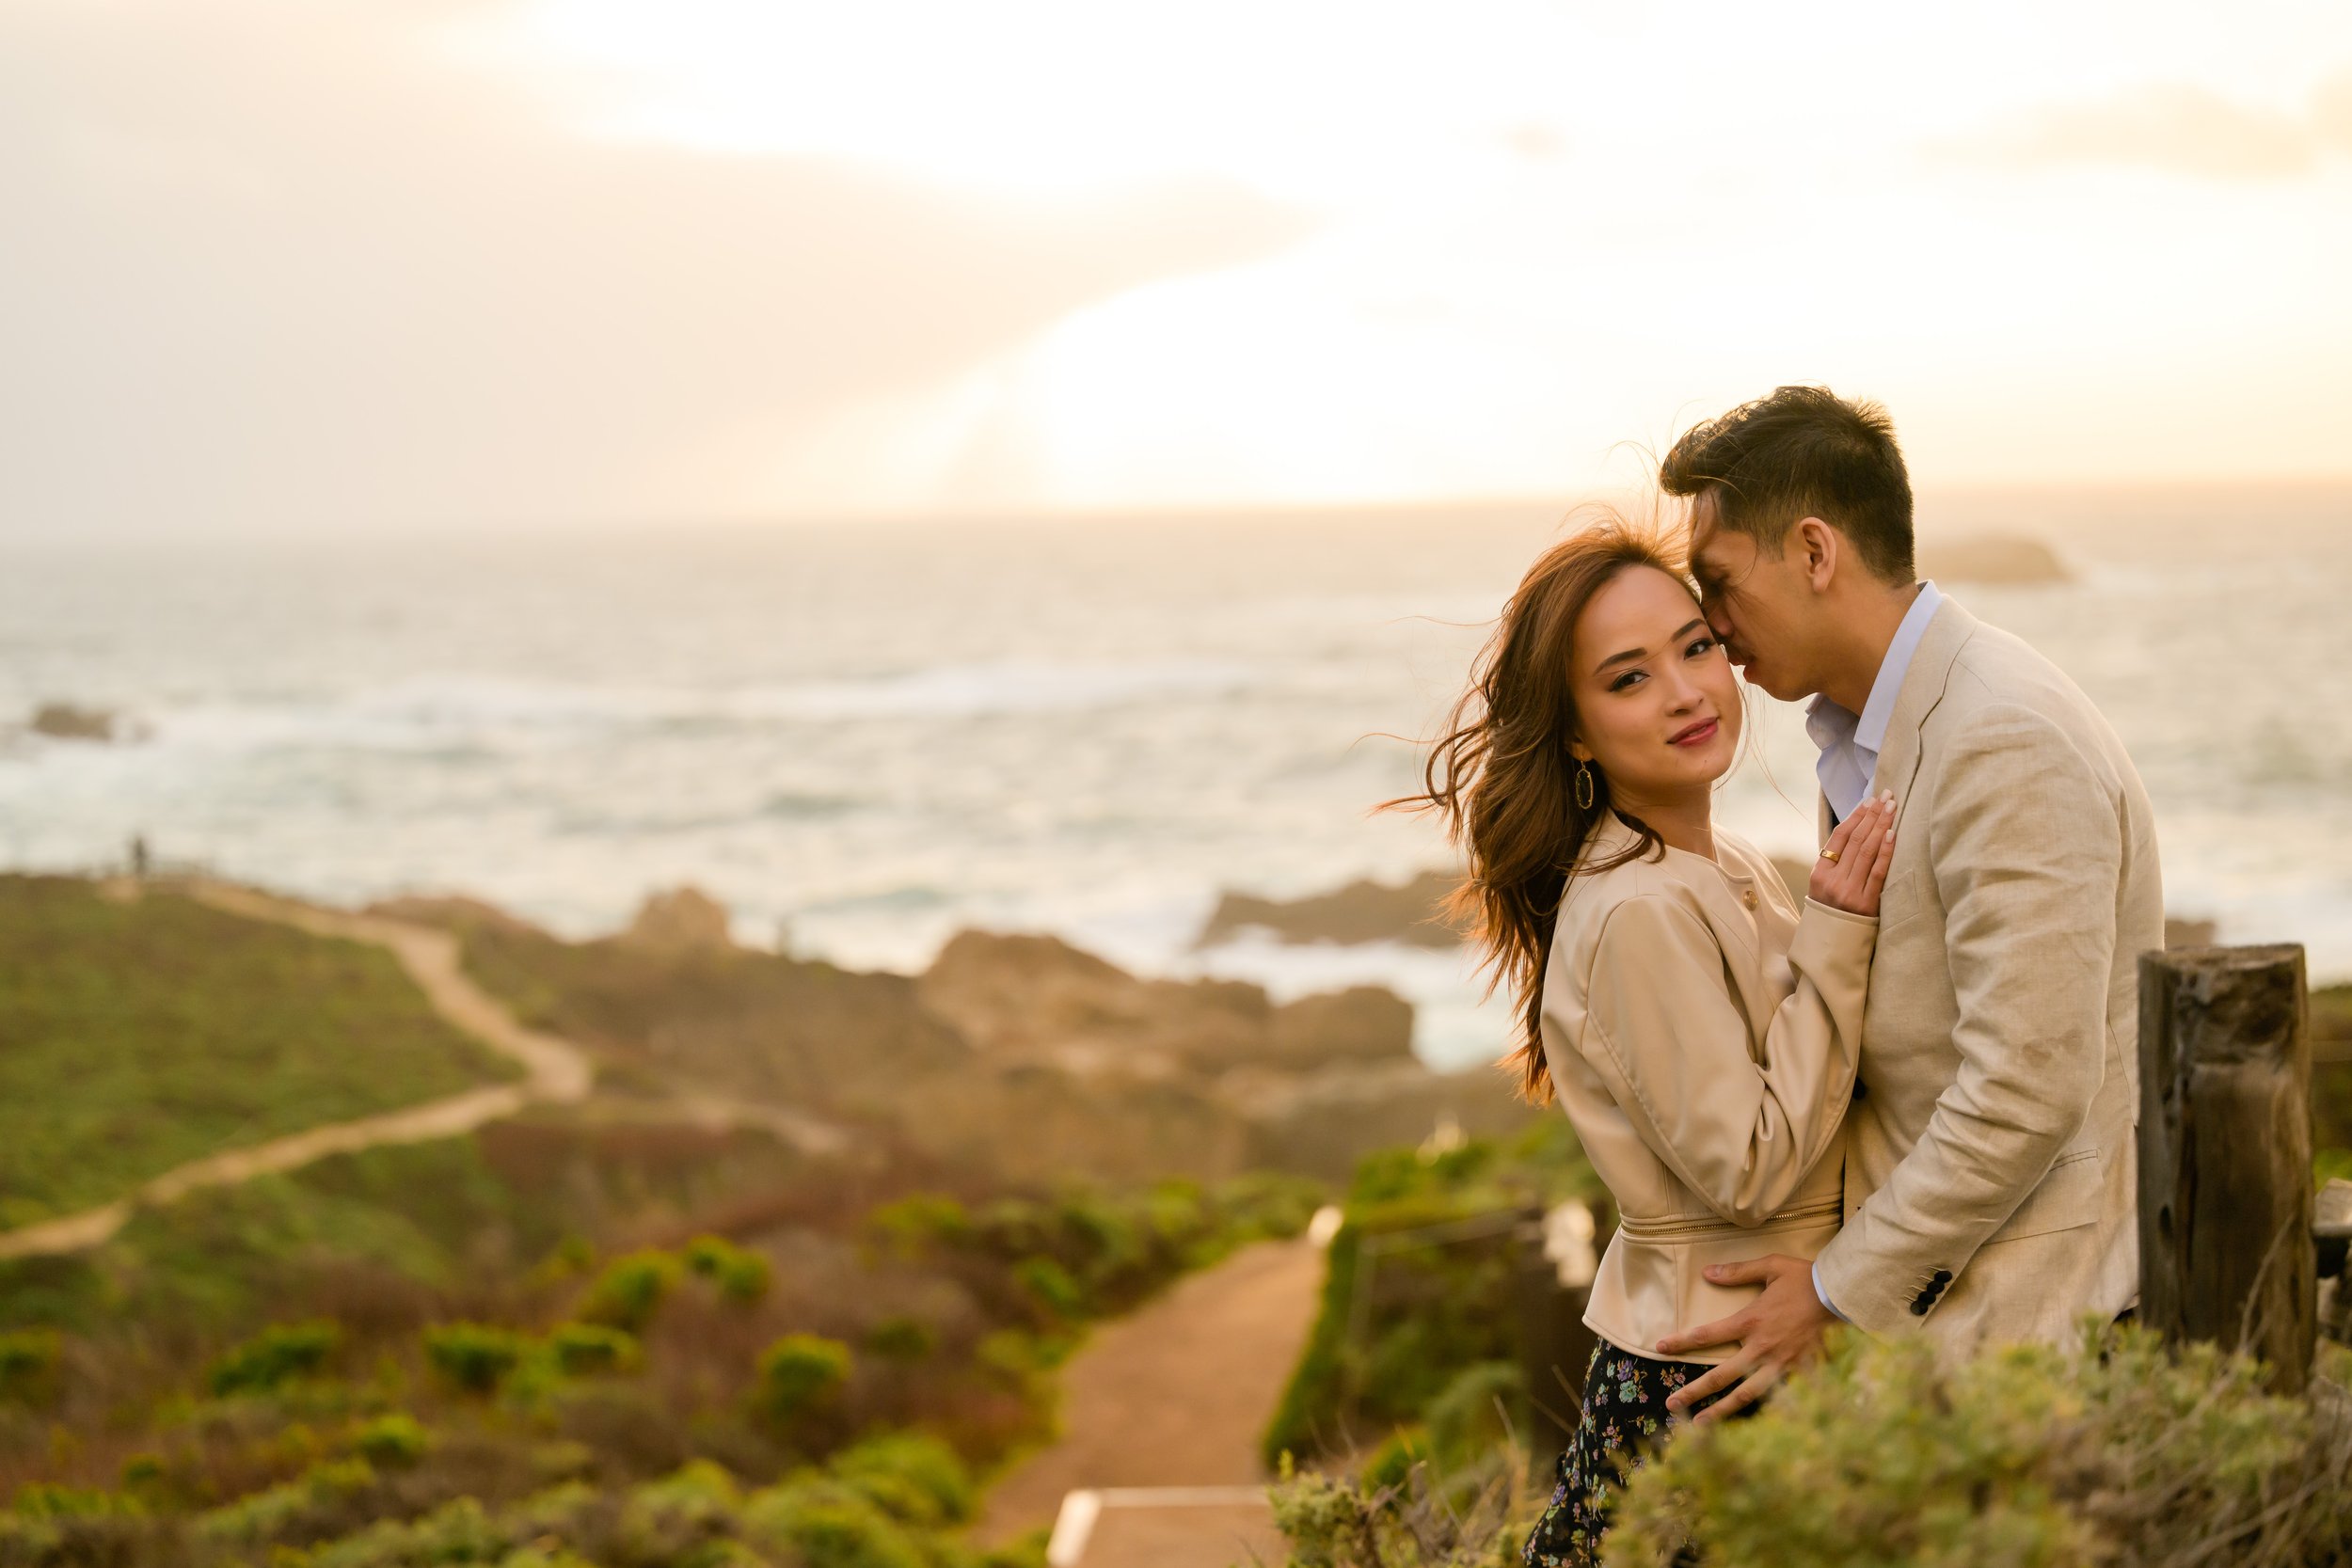 Z9A_4922_Lucy_and_Minh_Garrapata_Big_Sur_Carmel_Engagement_Photography.jpg